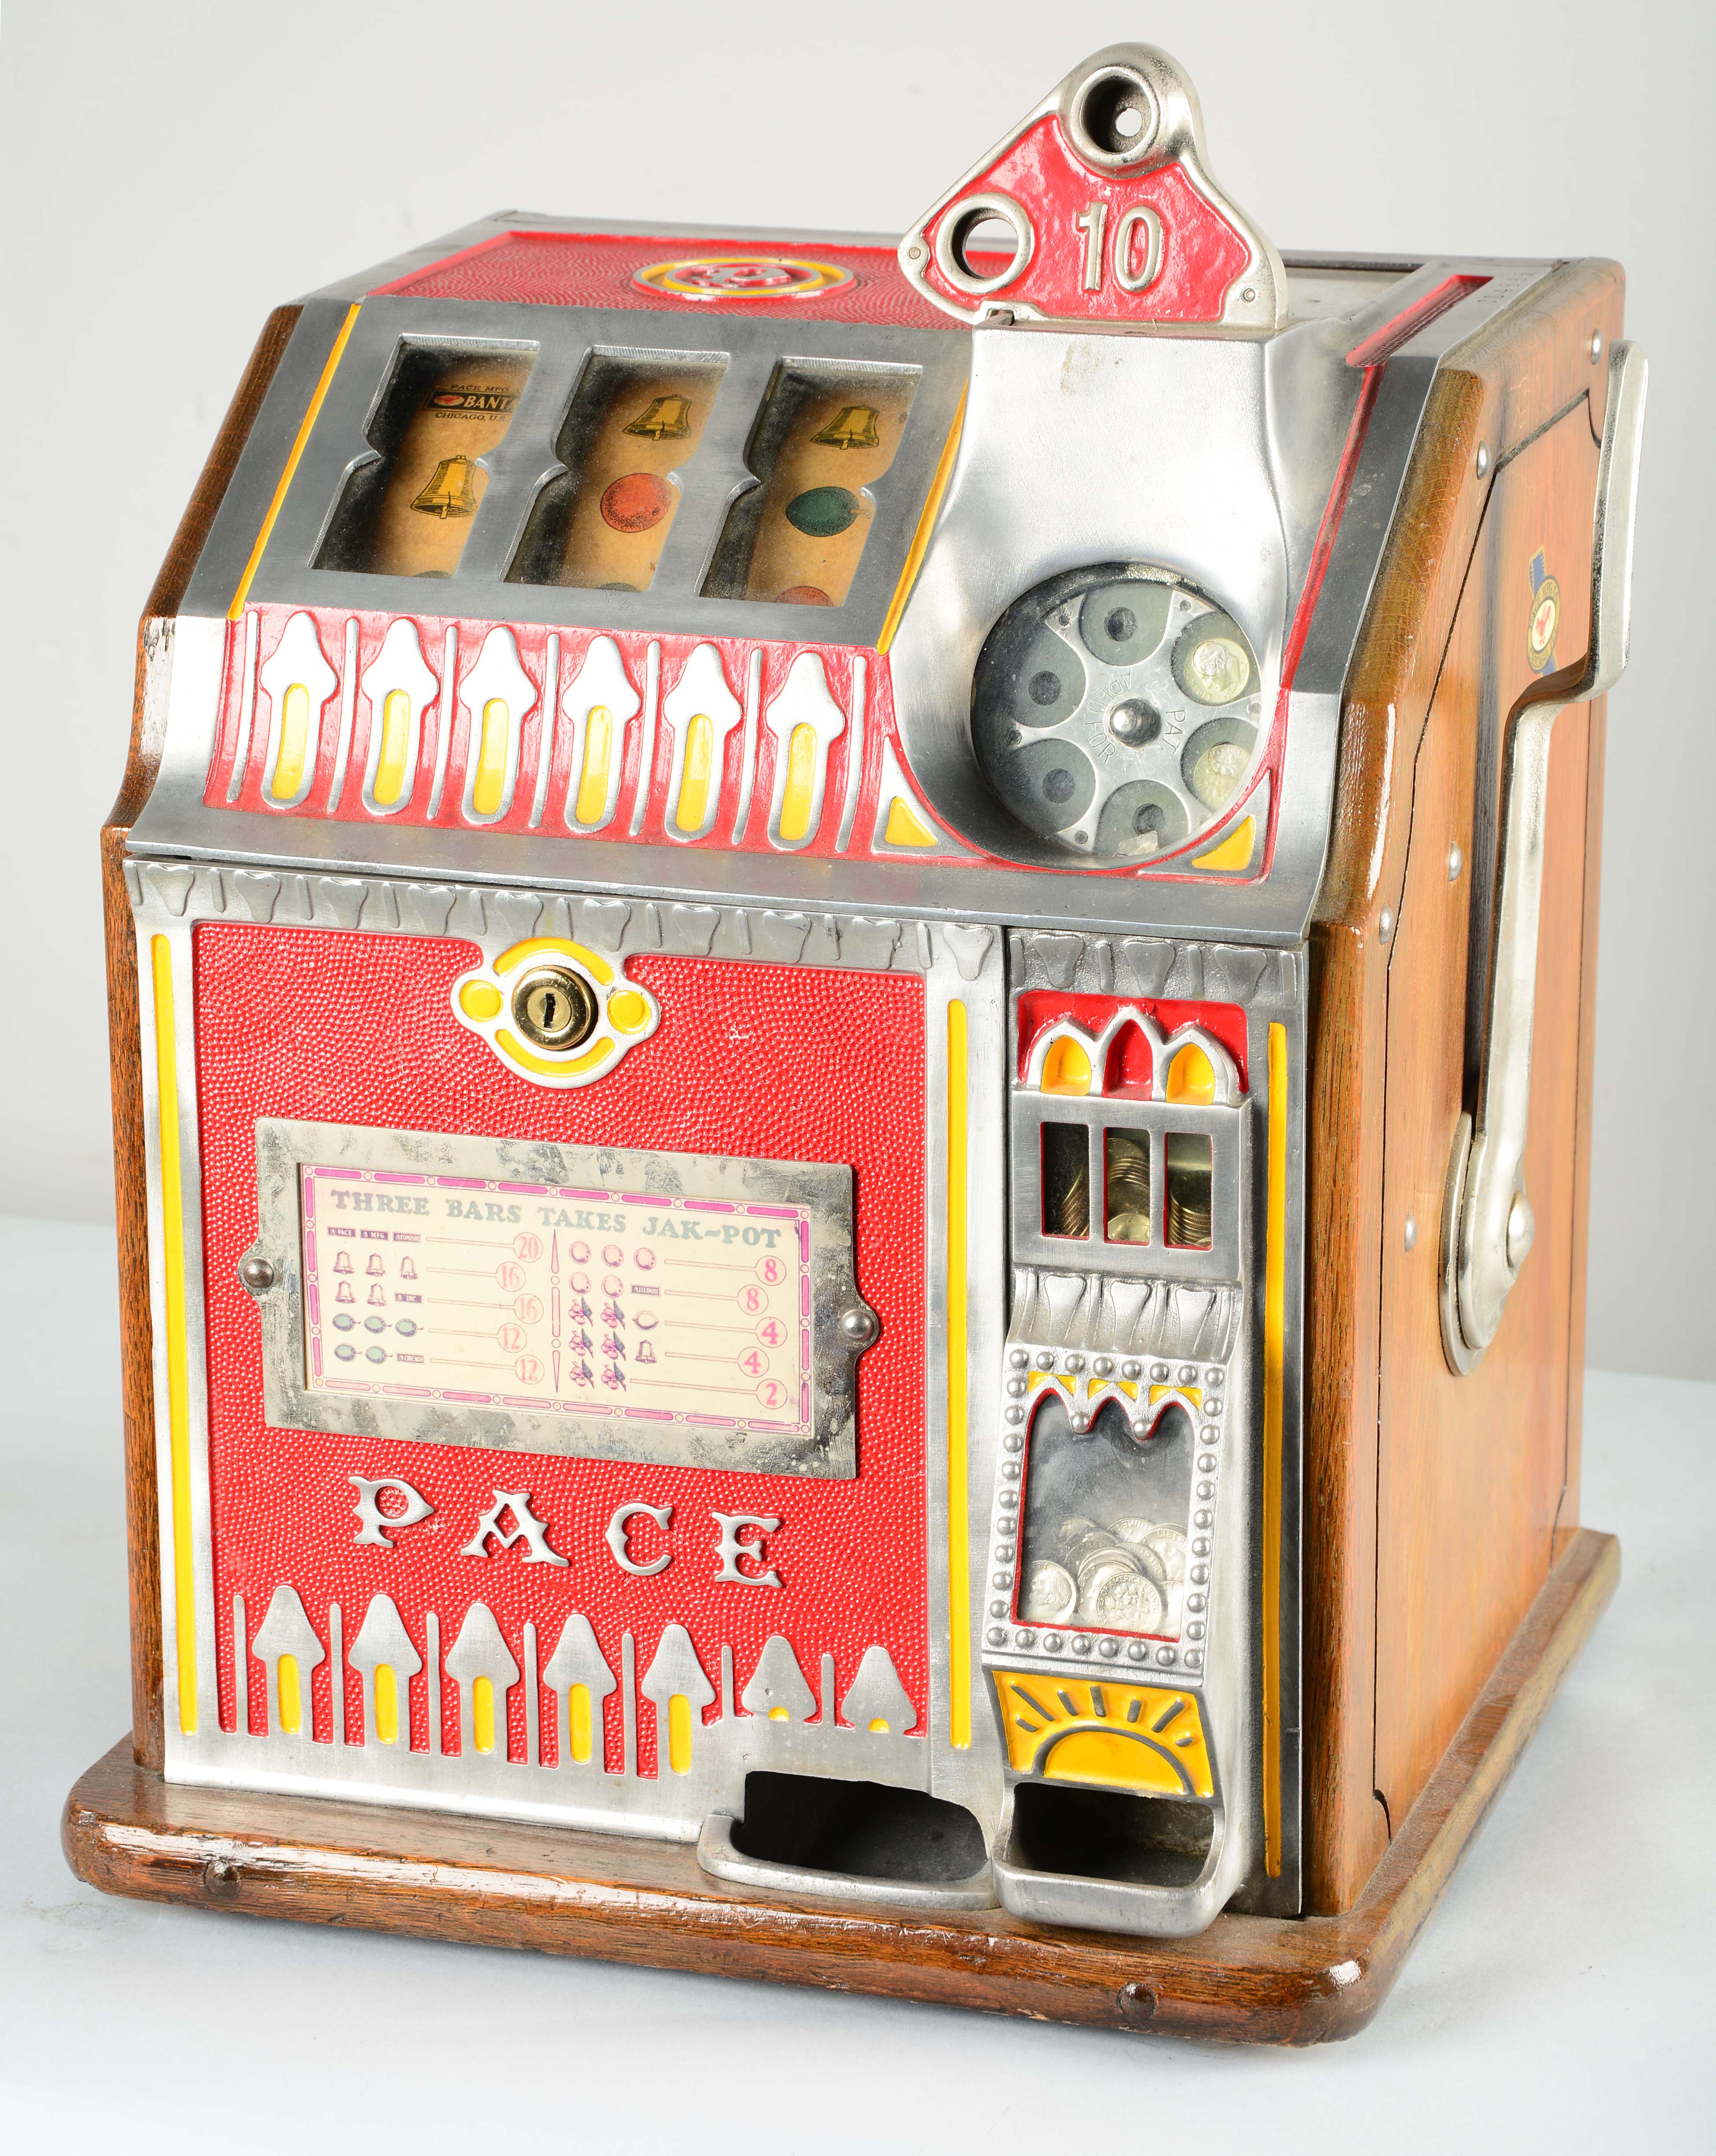 pace 8 star bell nickle slot machine